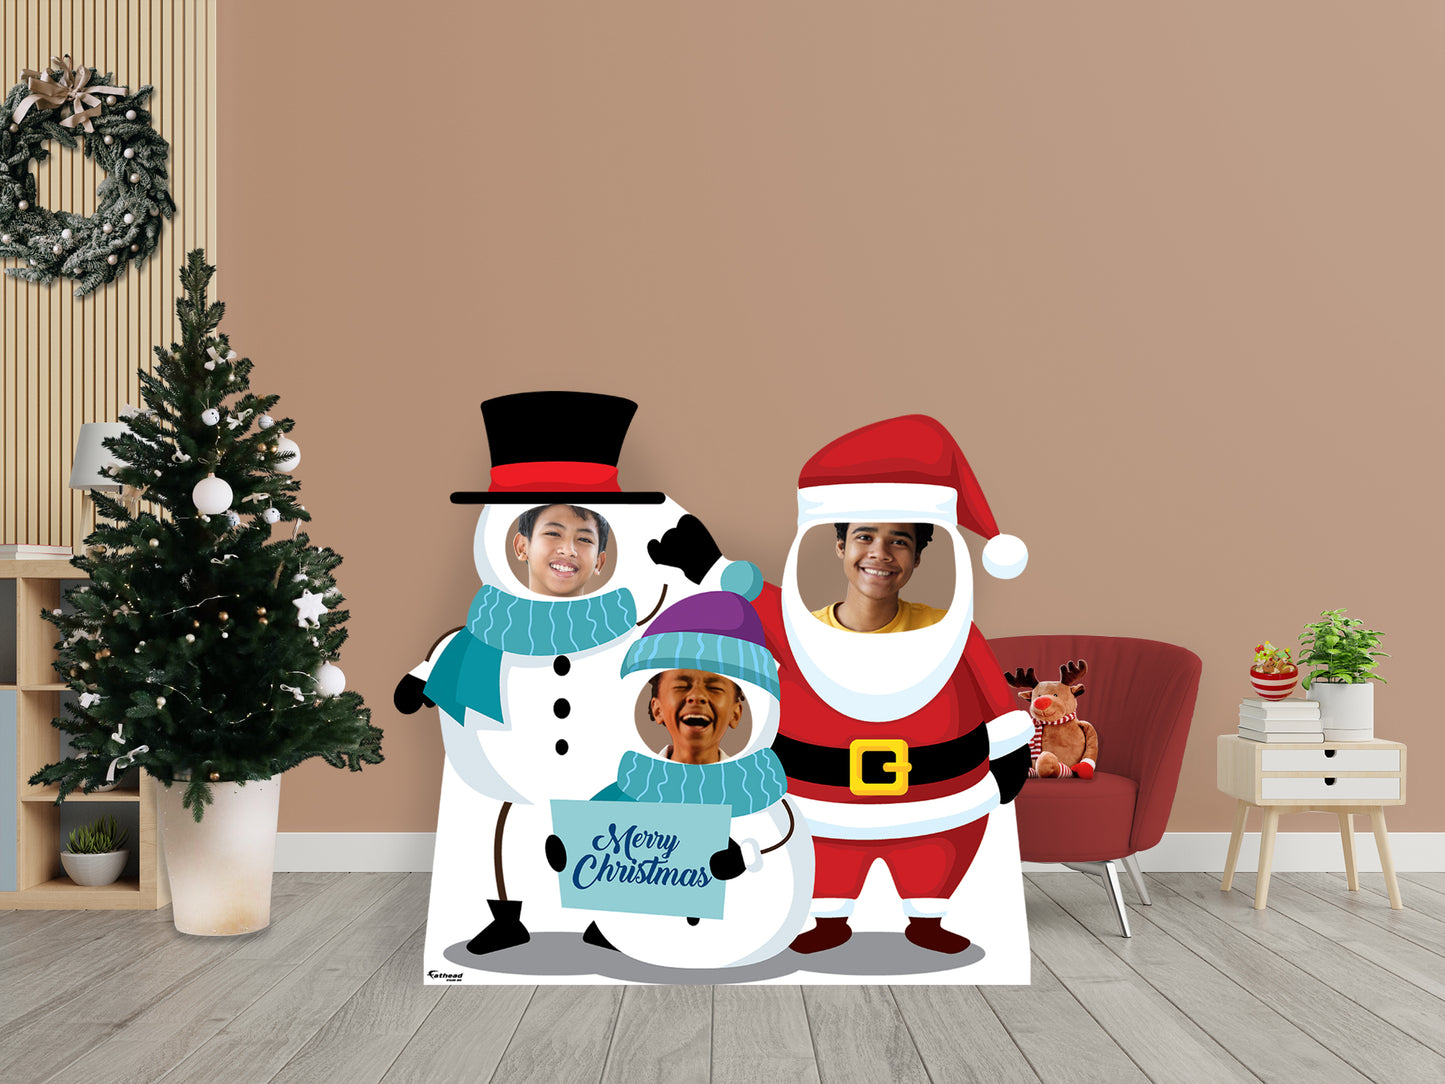 Christmas: Santa and two Snowman Life-Size   Foam Core Cutout  -      Stand Out